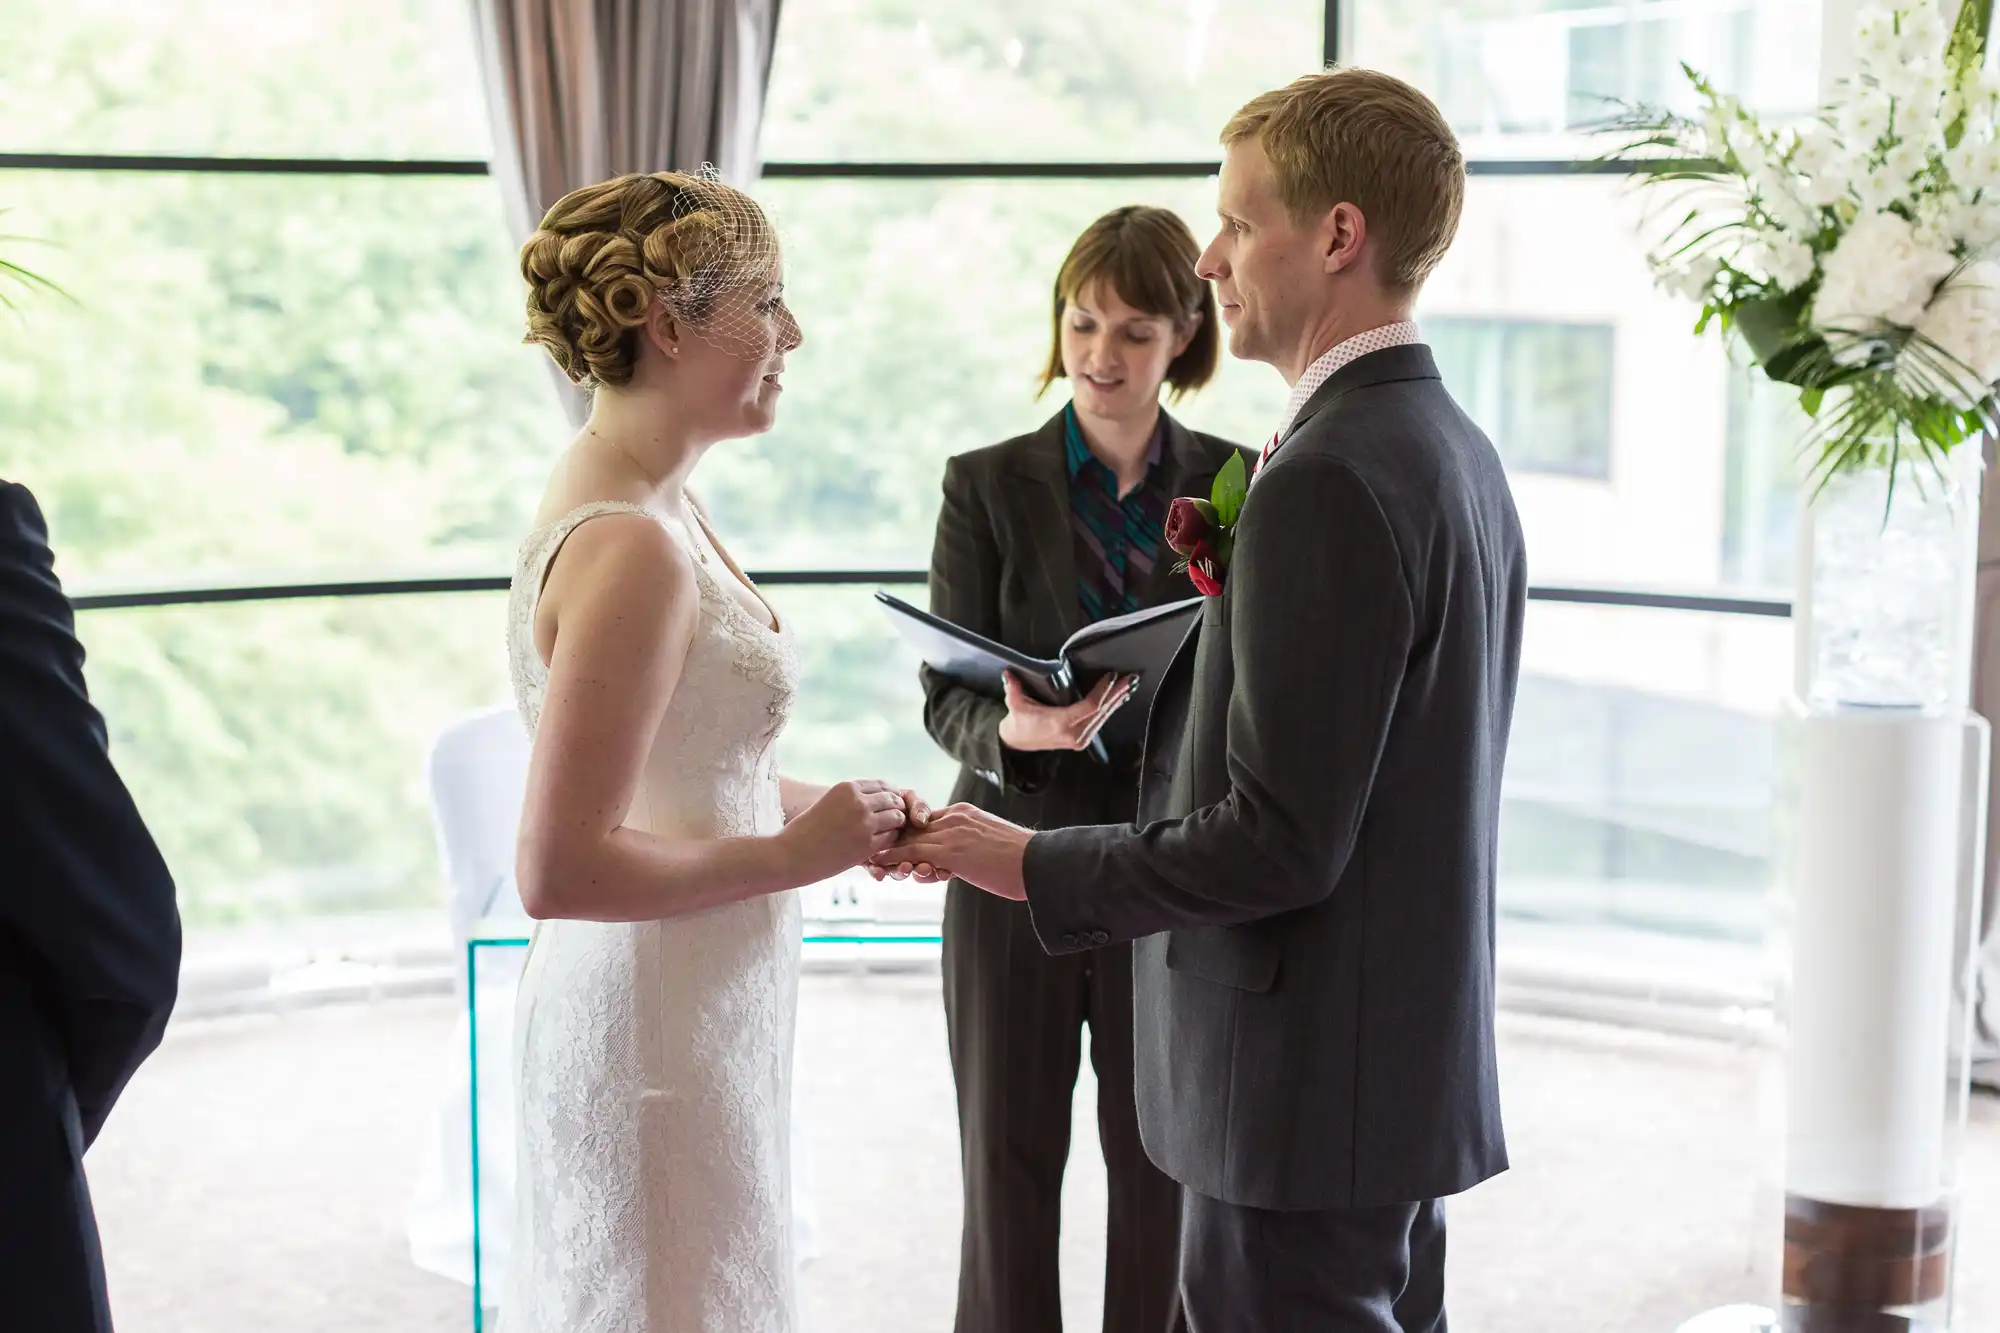 A bride and groom hold hands while exchanging vows, with an officiant holding a book in the background at an indoor wedding venue.